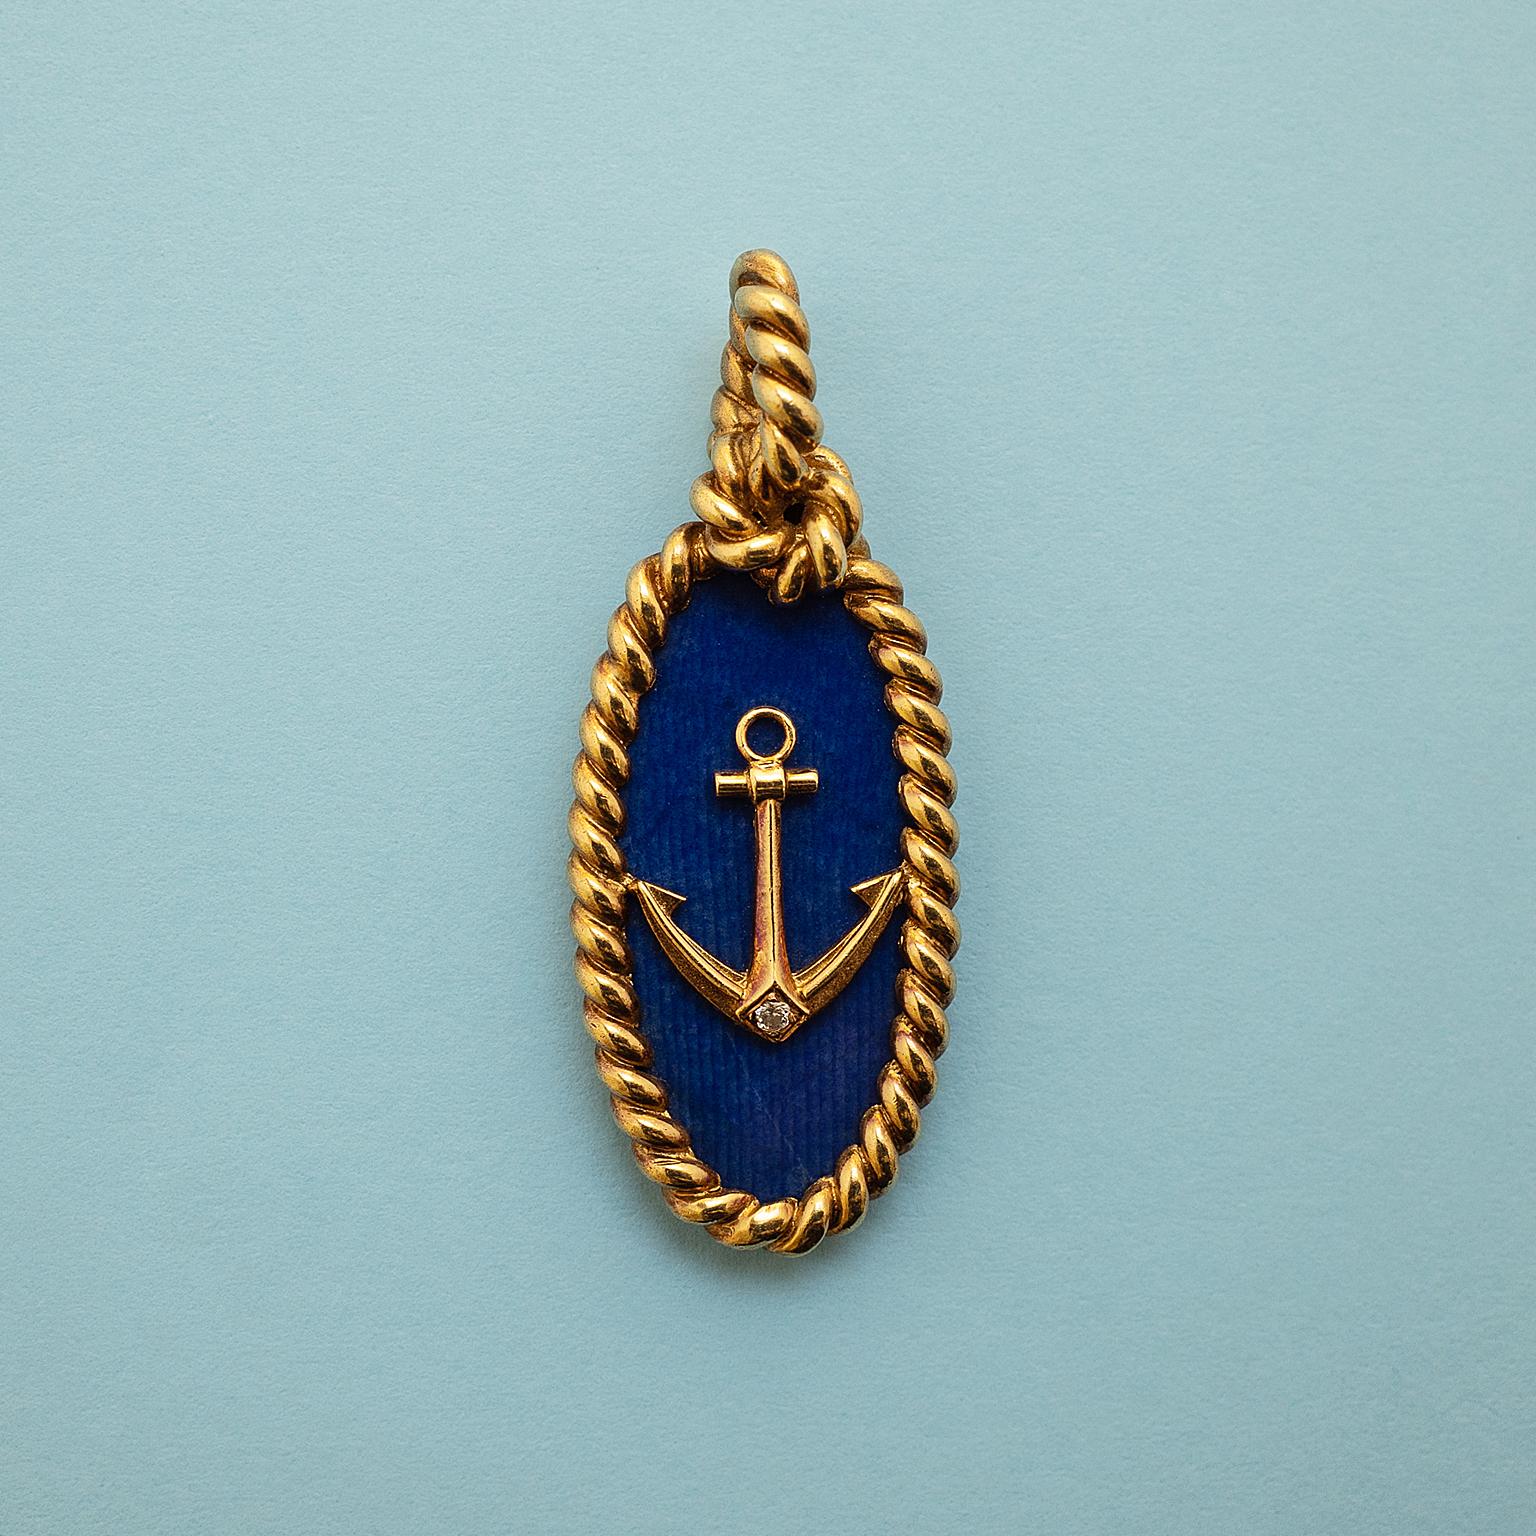 A nautical pendant of a gold and diamond anchor on a slab of sodalite with a border and bail or twisted gold knotted as a rope, signed and numbered, Van Cleef & Arpels, circa 1970.

length: 4.5 cm.